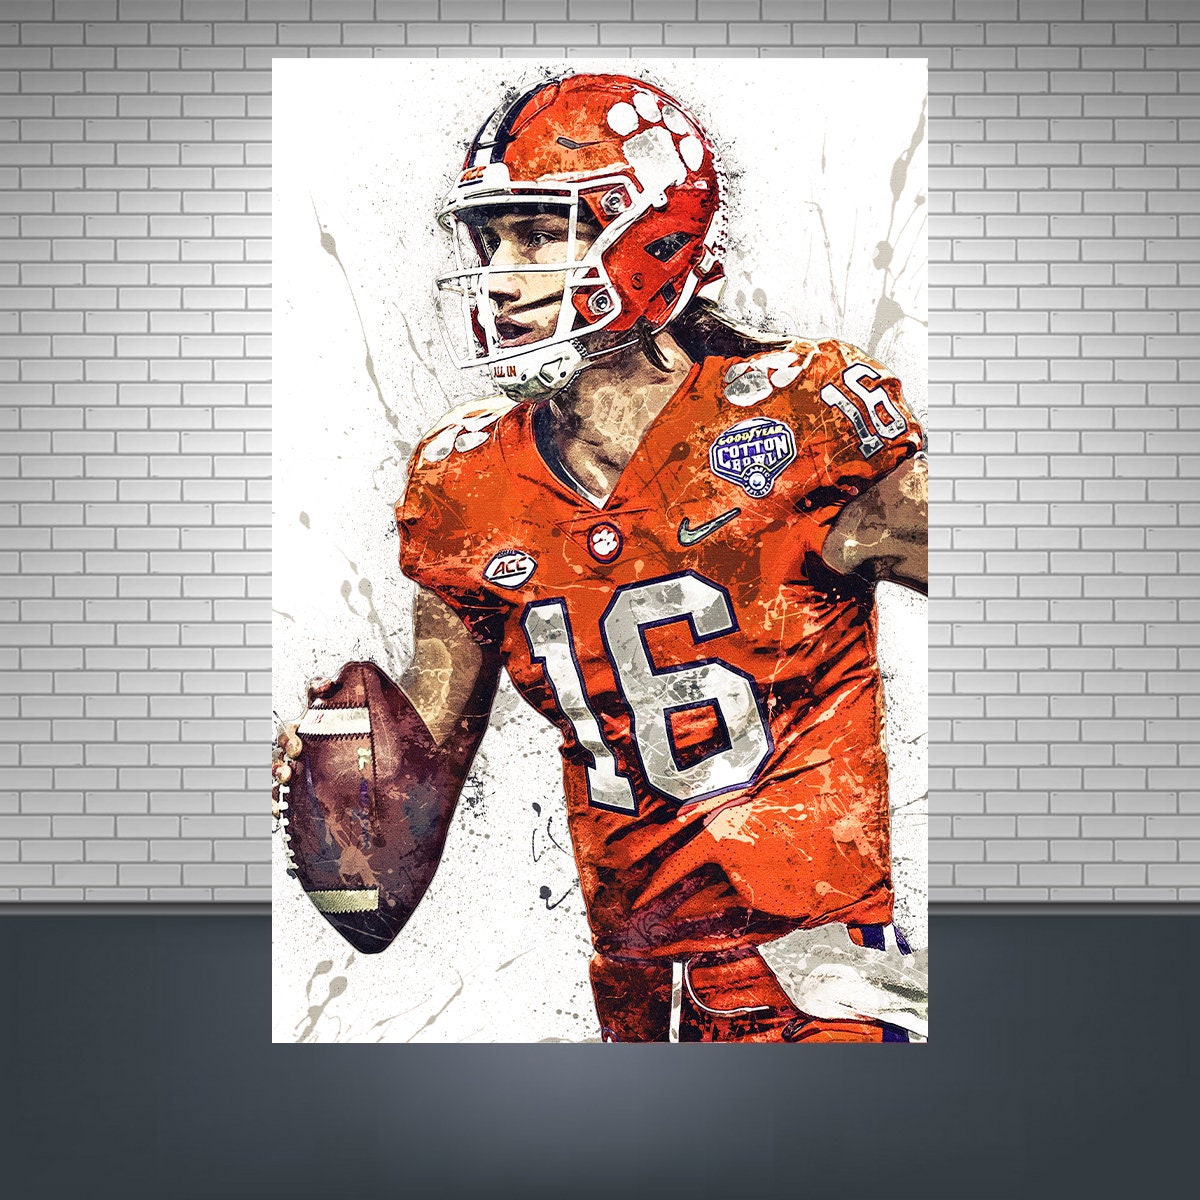 Discover Trevor Lawrence Poster, Clemson Tigers, Gallery Canvas Wrap, Kids Room, Man Cave, Game Room, Bar